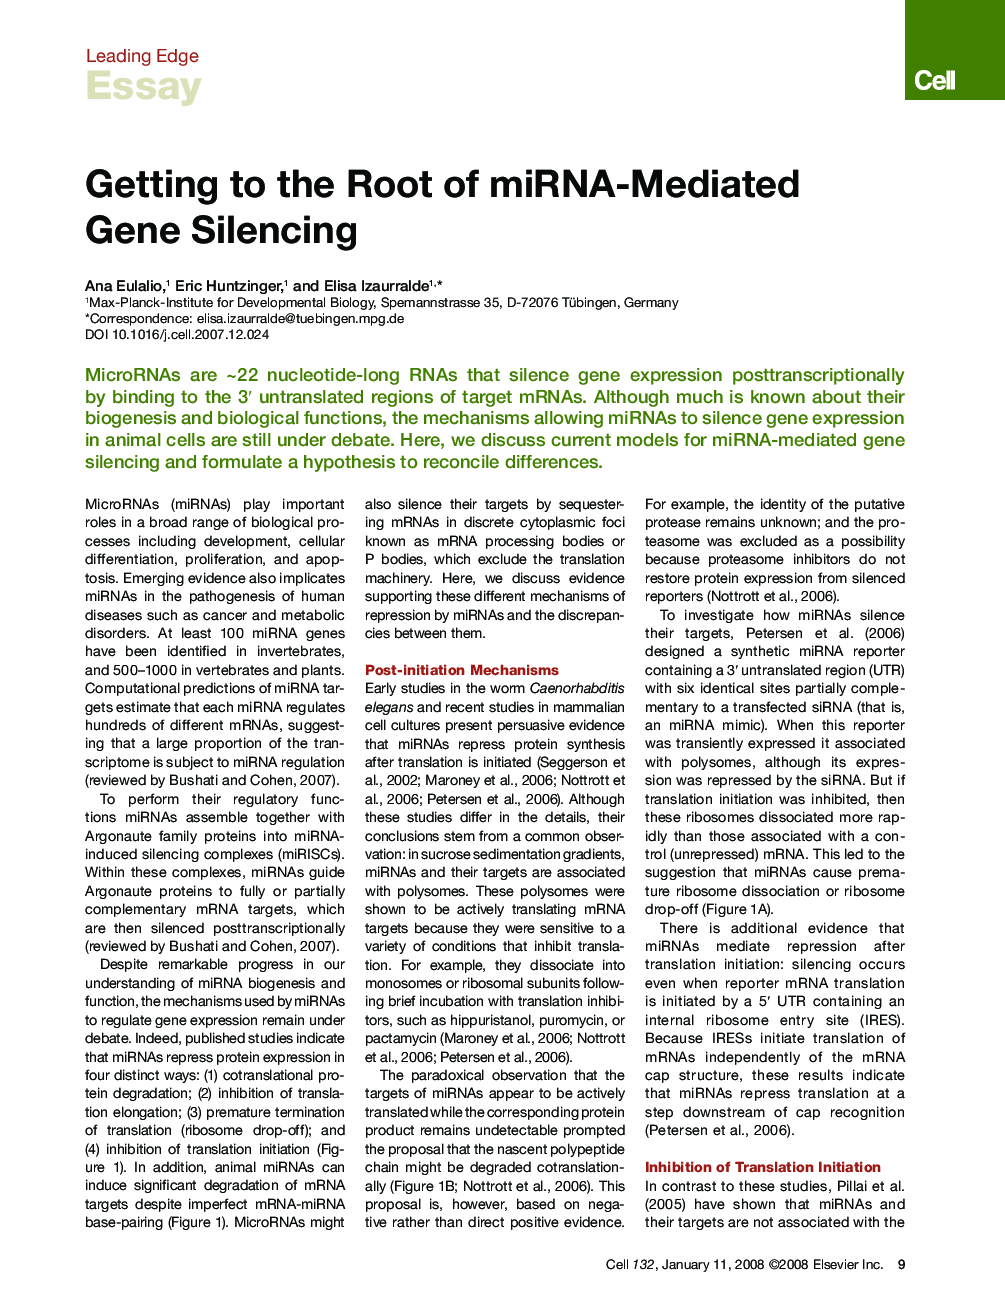 Getting to the Root of miRNA-Mediated Gene Silencing